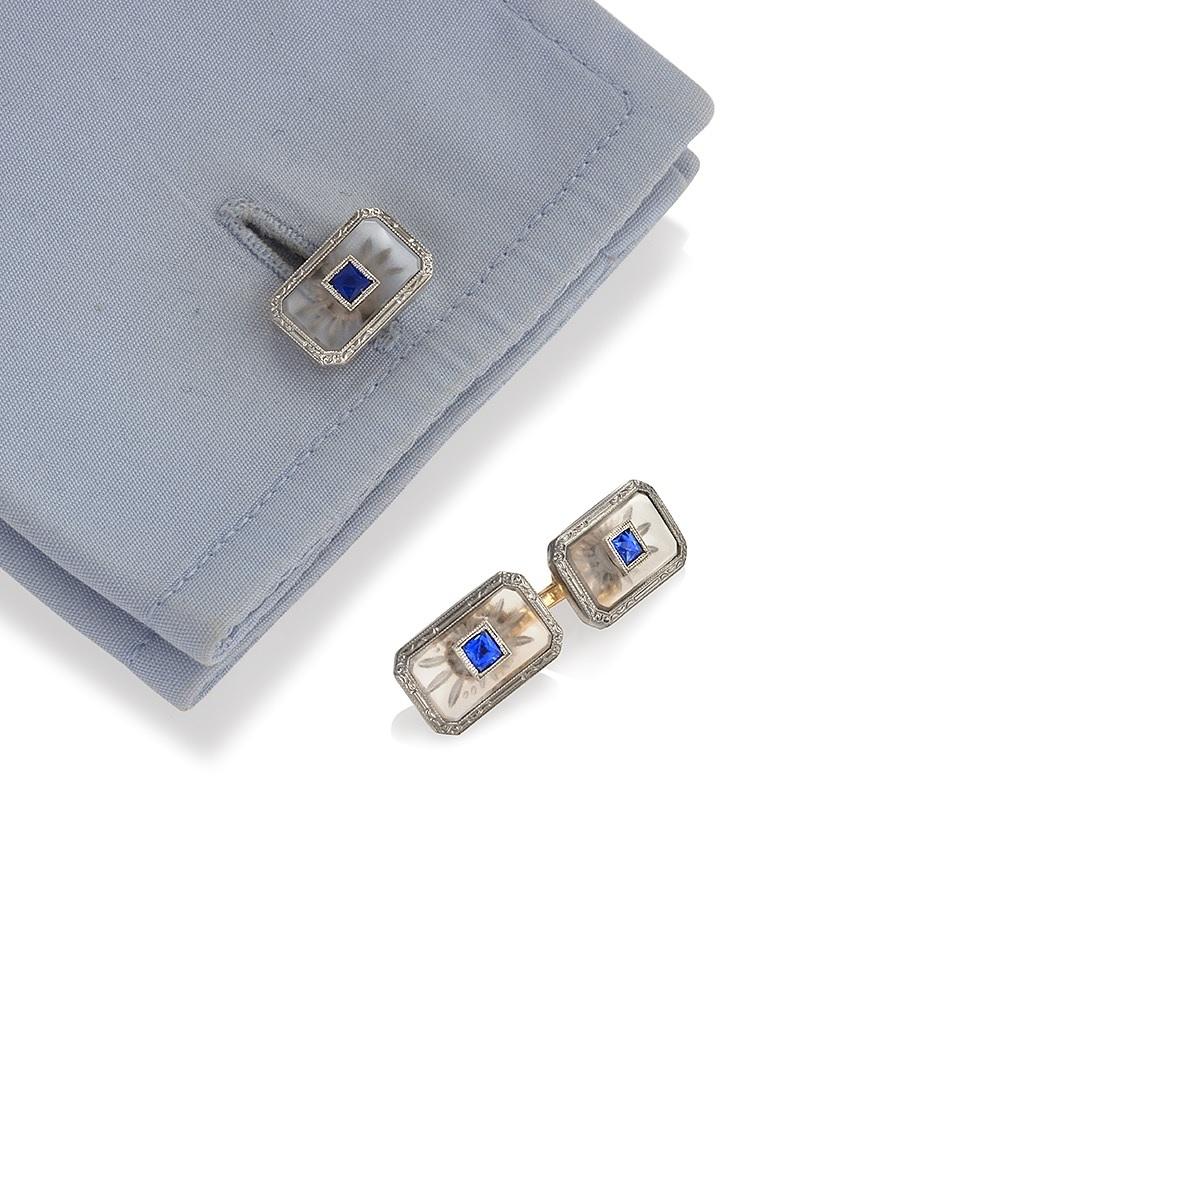 An American Art Deco platinum and 14 karat gold, sapphire and rock crystal dress set by Krementz & Co.  The dress set consists of a pair of double sided rectangular cuff links set with center french-cut sapphires and 4 square dress studs made of